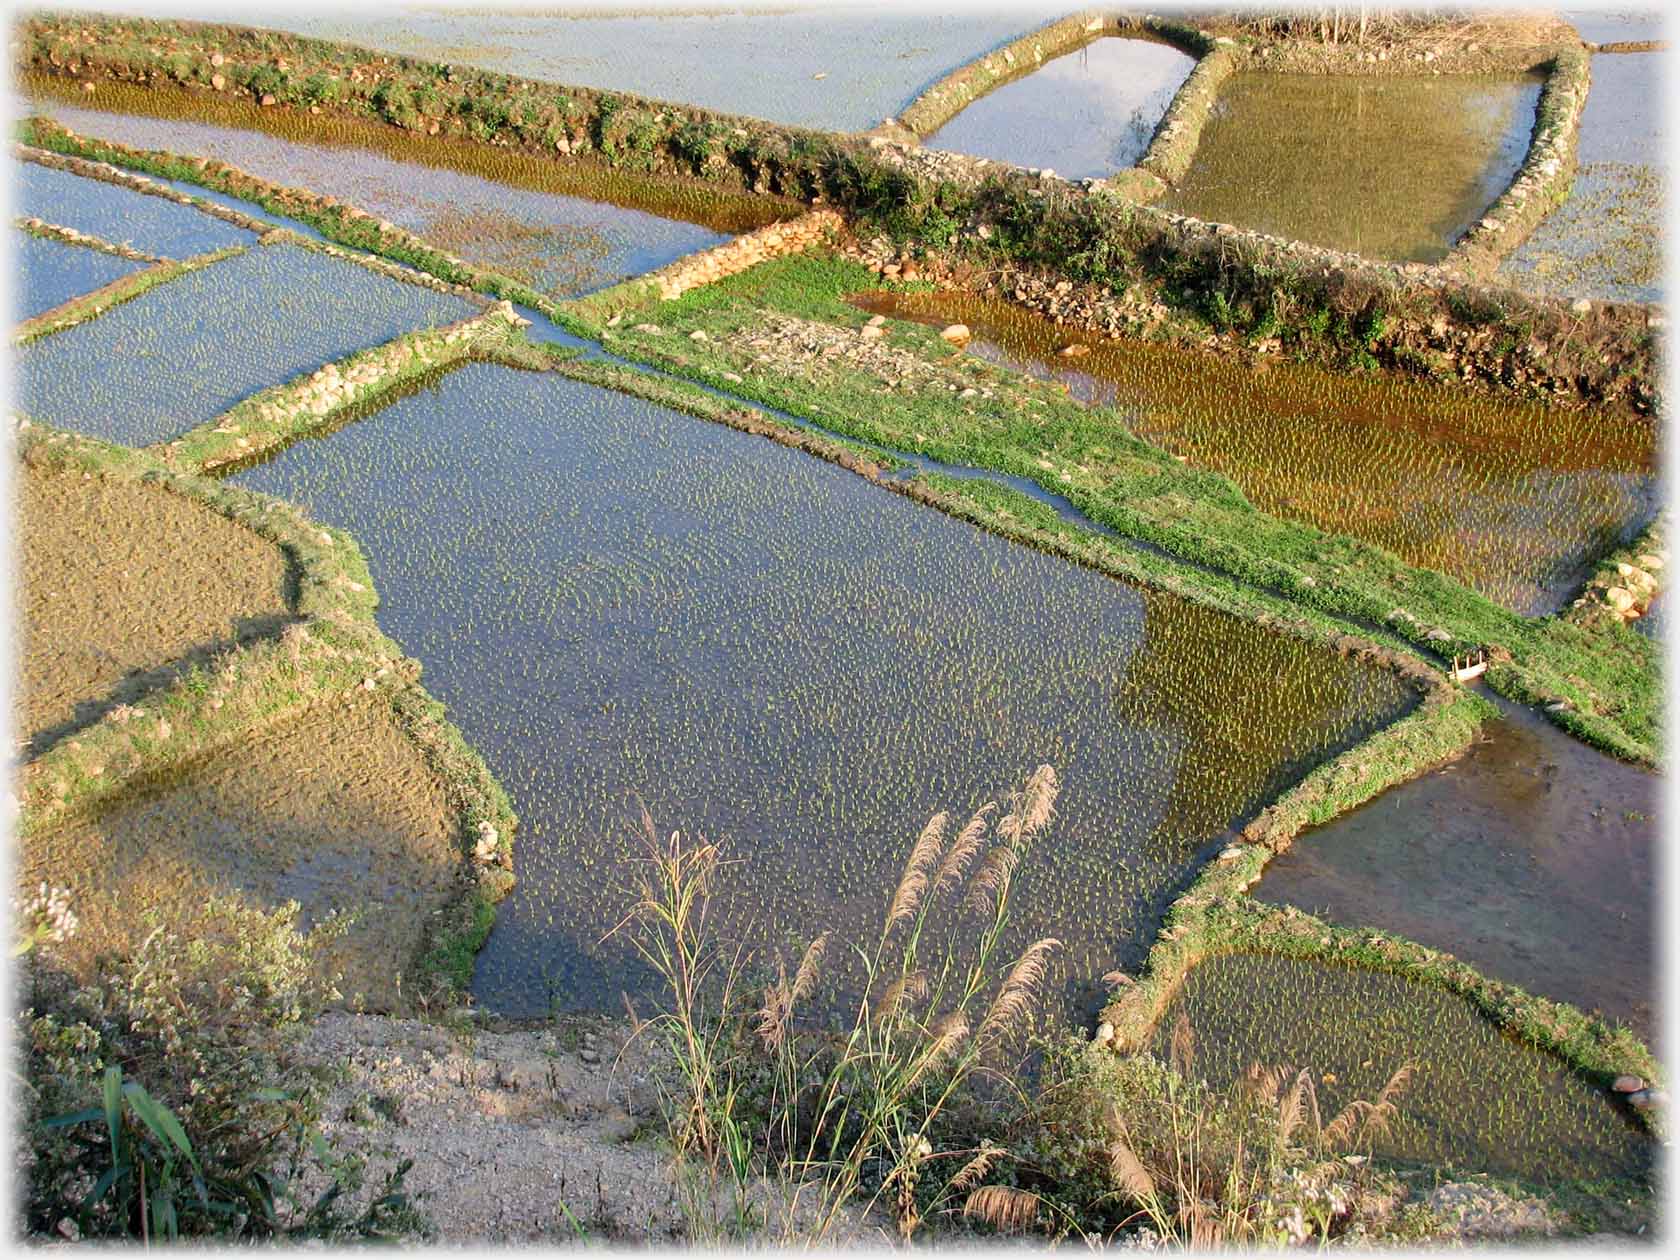 Field with paddy seedlings just showing above the water.